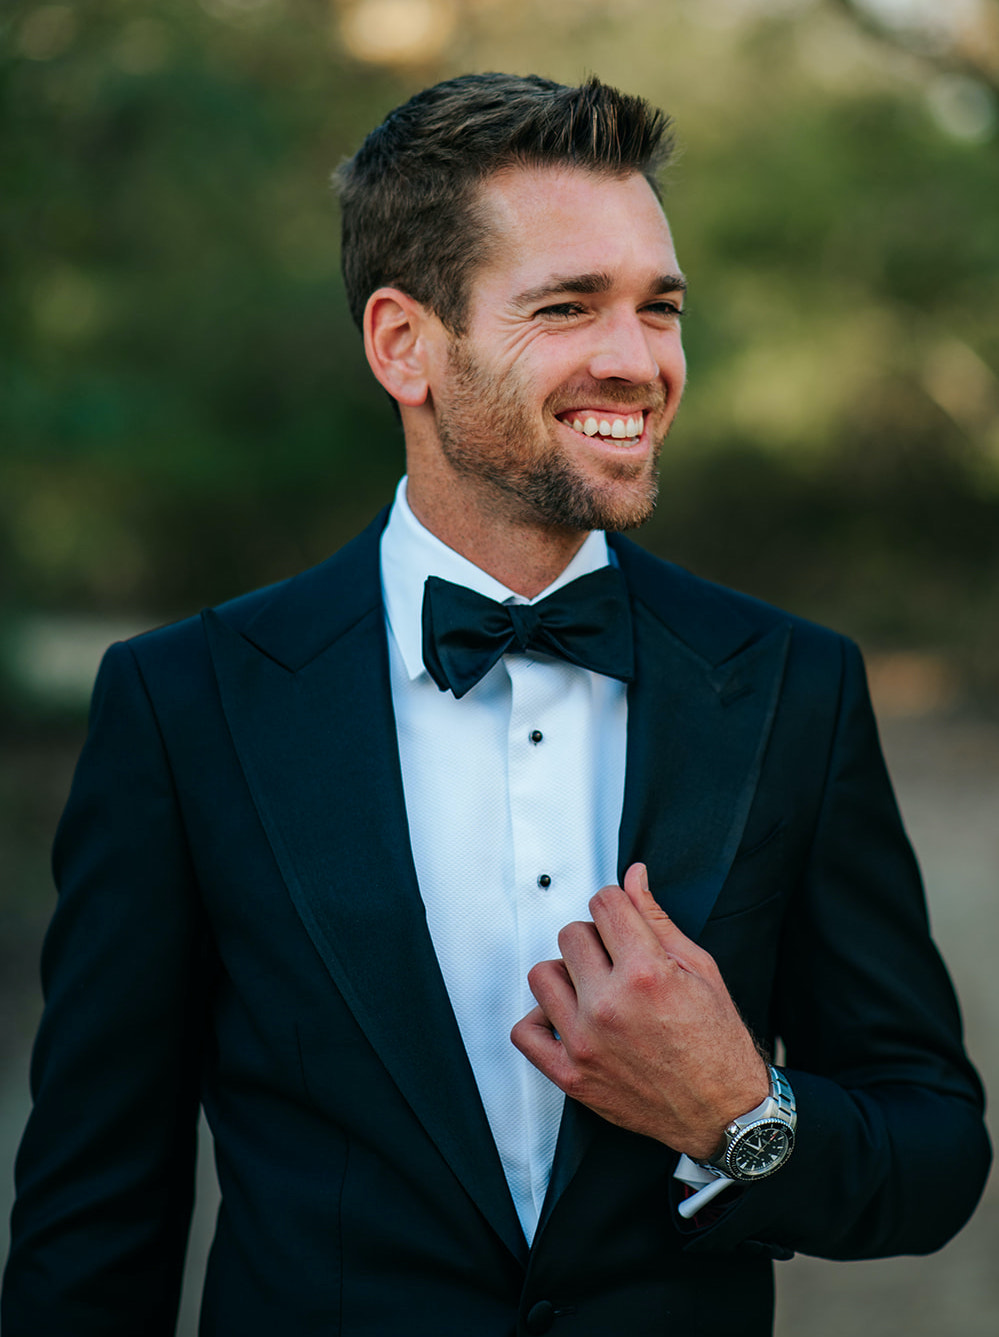 The groom smiles in his suit and bowtie at his winter wedding at 7F Lodge in College Station, TX.